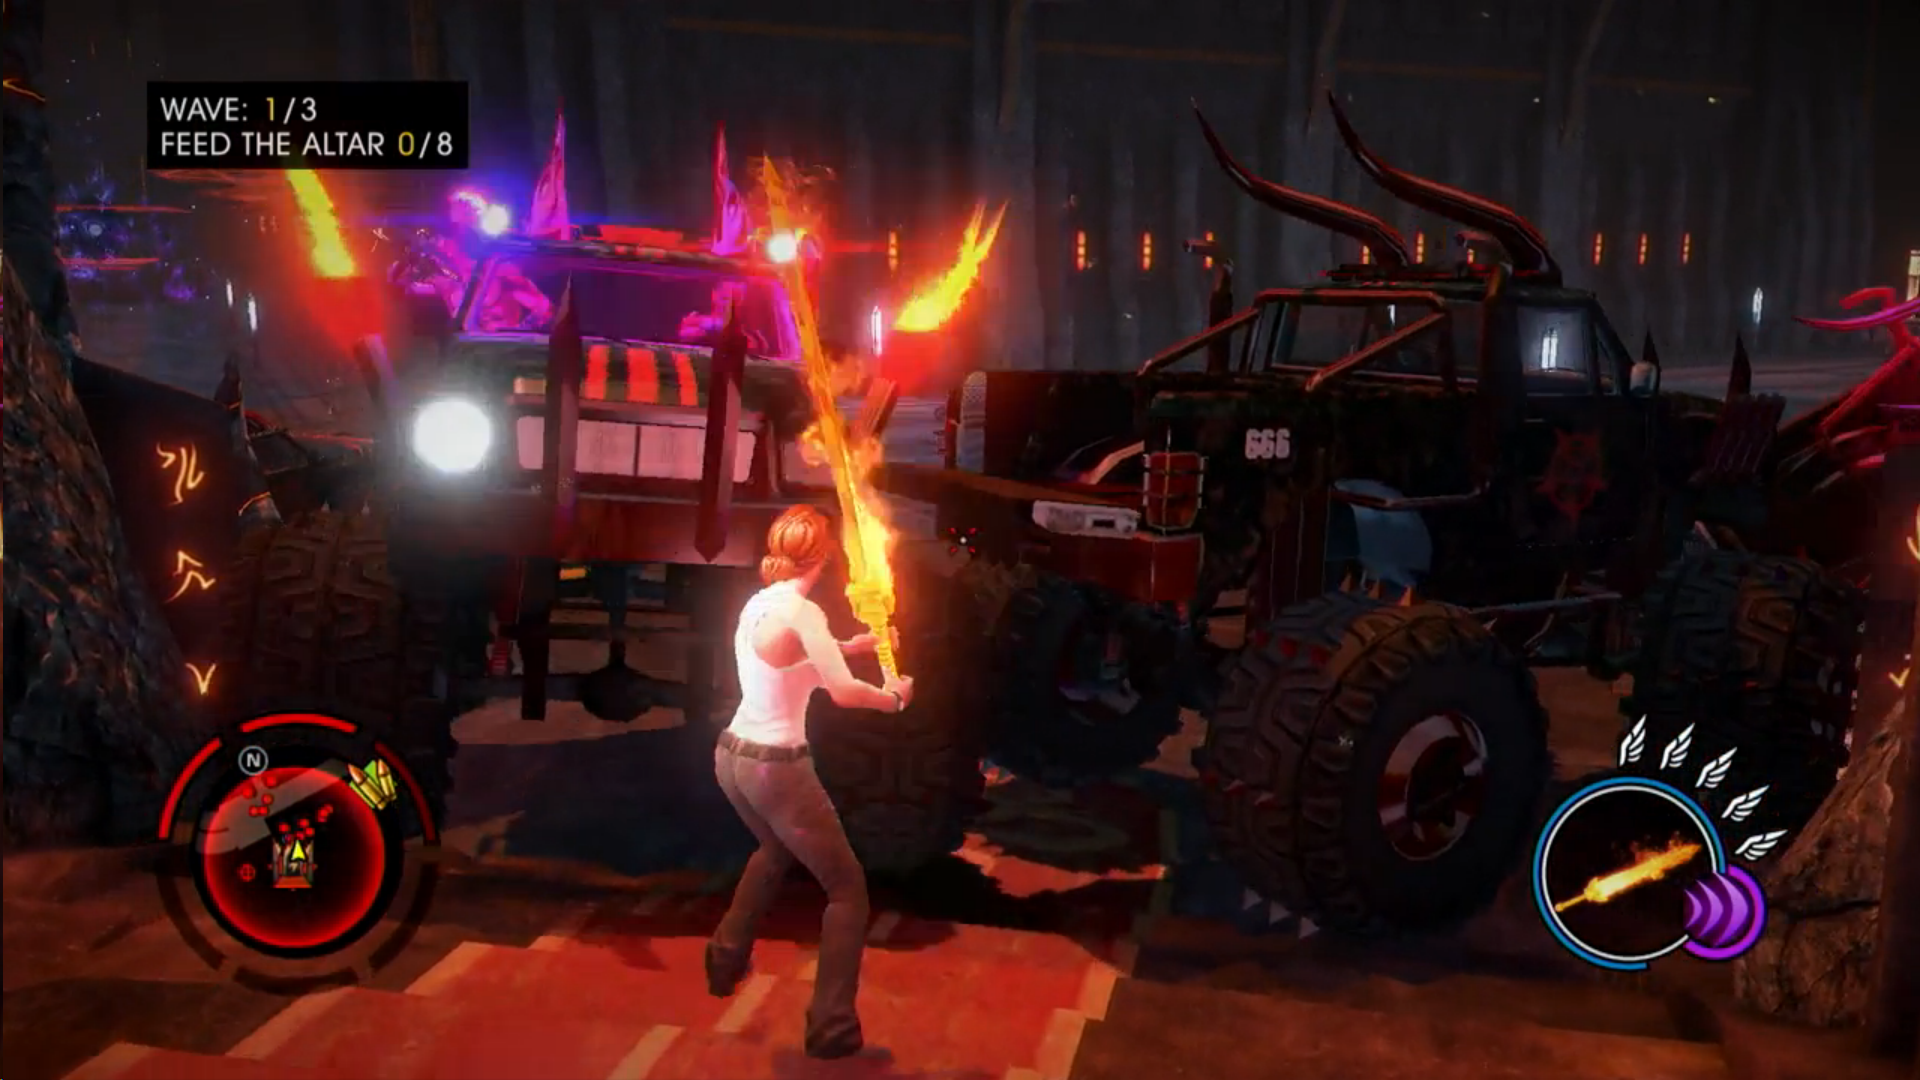 Saints Row: Gat out of Hell - Flying Gameplay [HD] 